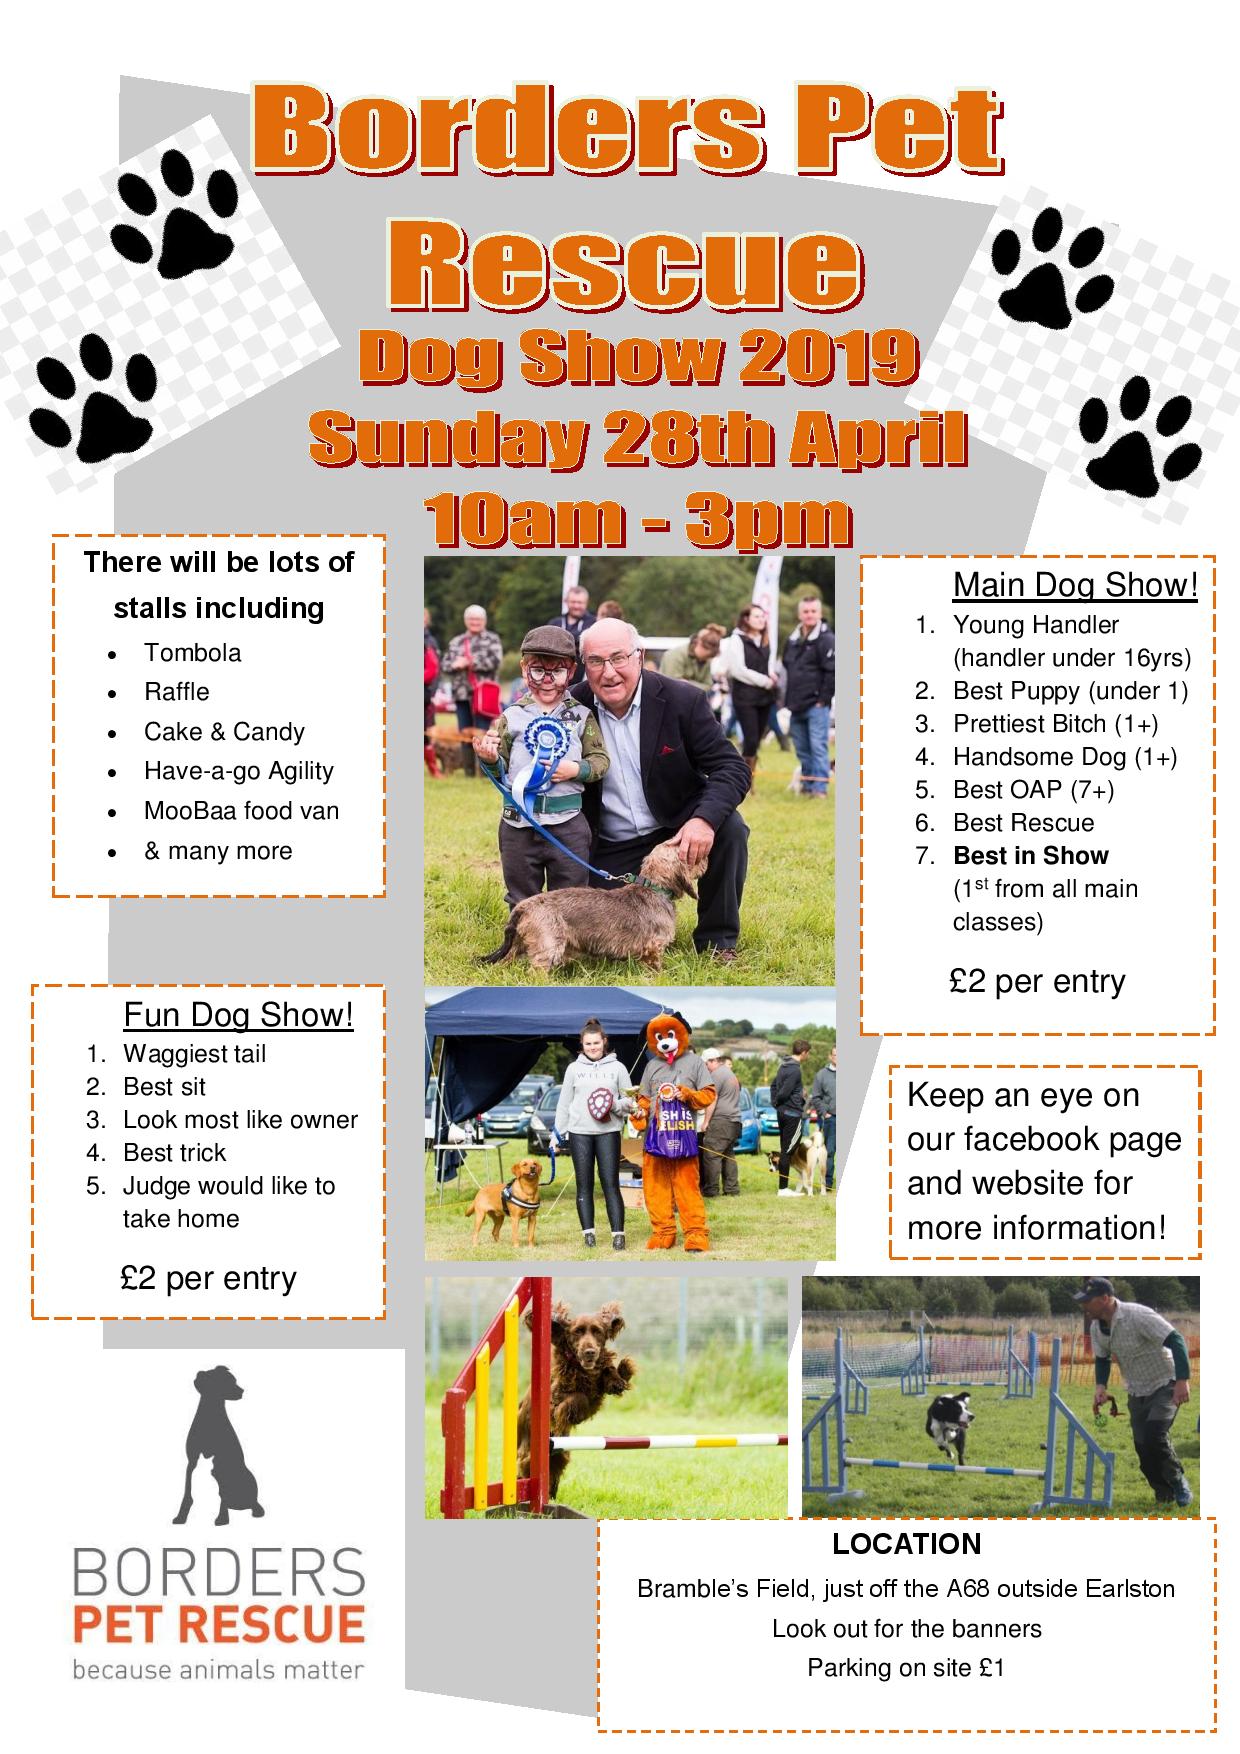 DOG SHOW first edition poster